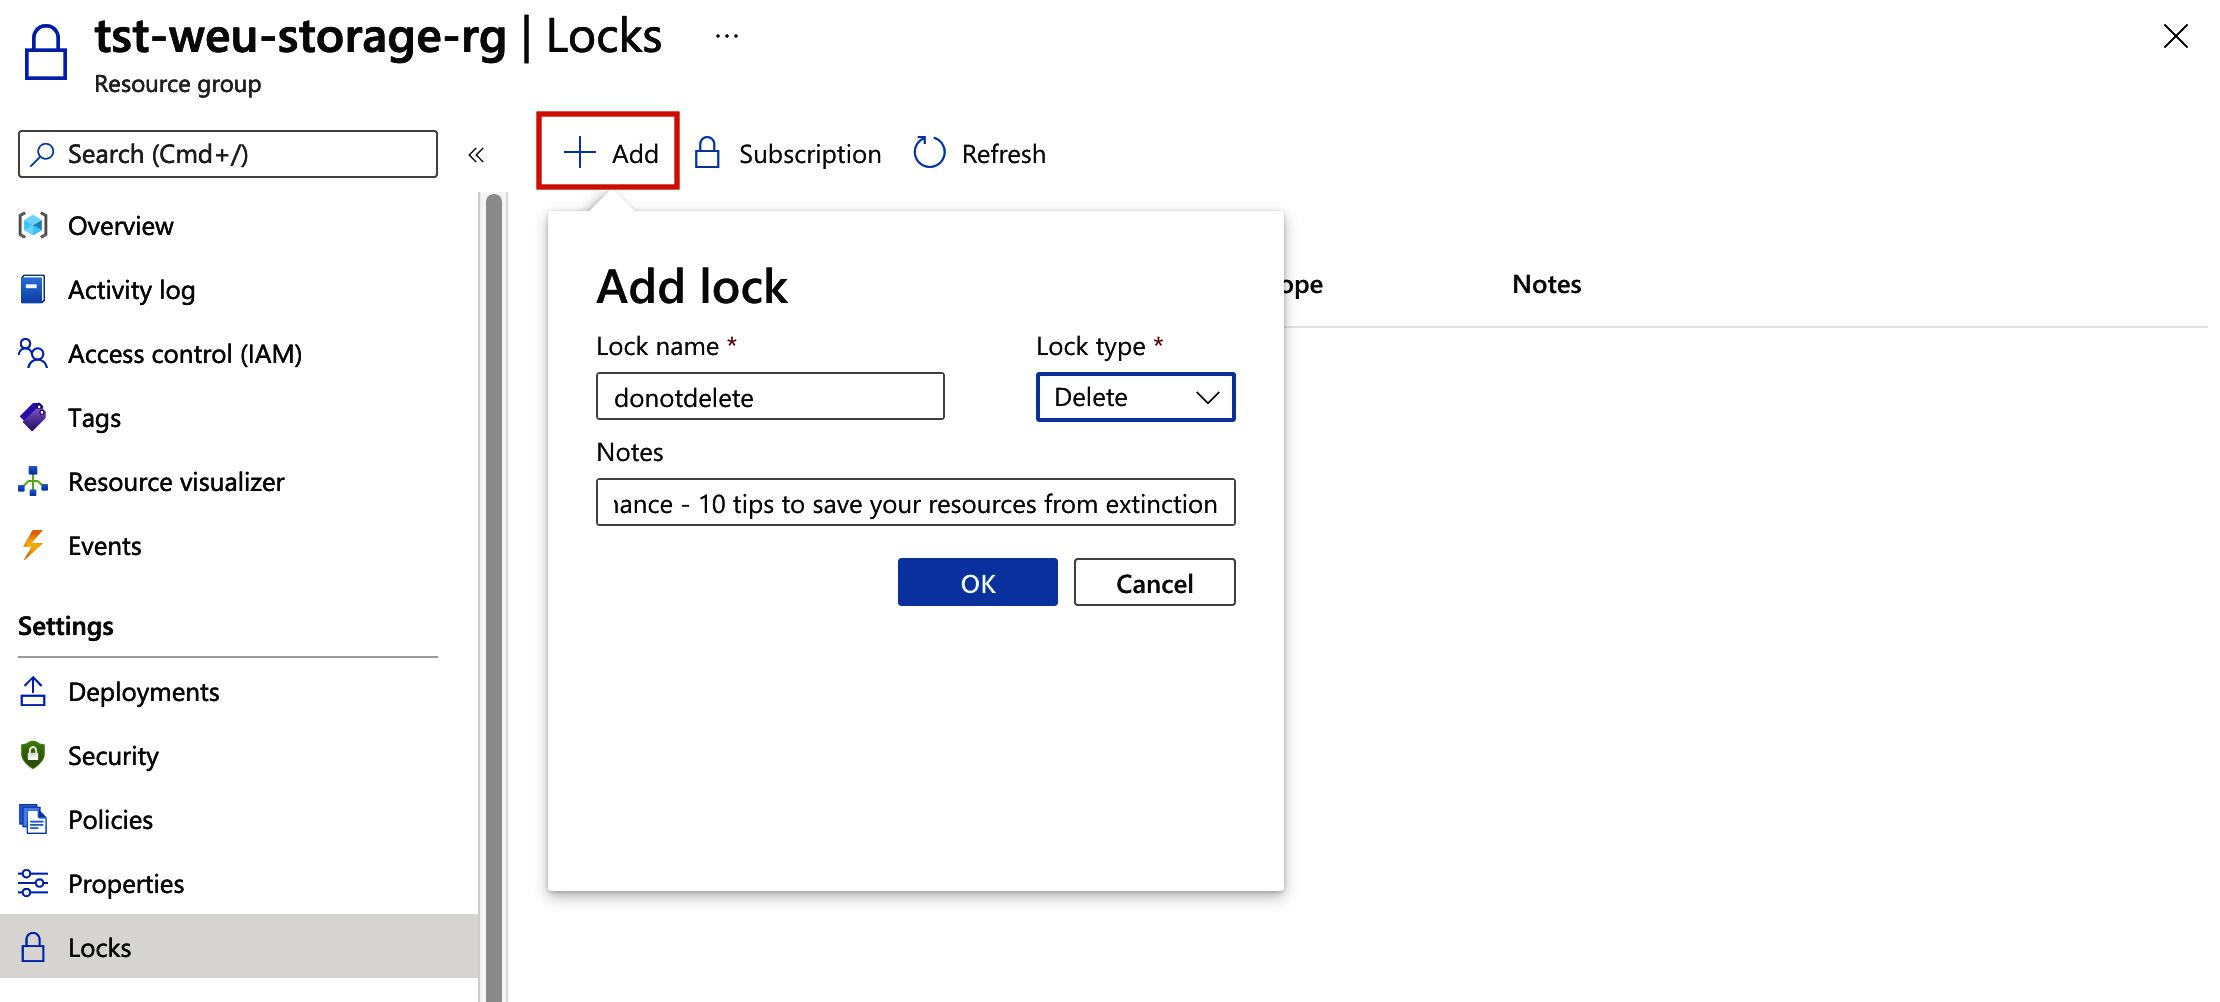 Image of the resource group locks settings view in the Azure Portal. The &lsquo;Add&rsquo; button is highlighted, when clicked it opens a dialogue box. In the Add dialogue box you can enter a lock name, enter a note and select a lock type (available types are delete and read-only) 